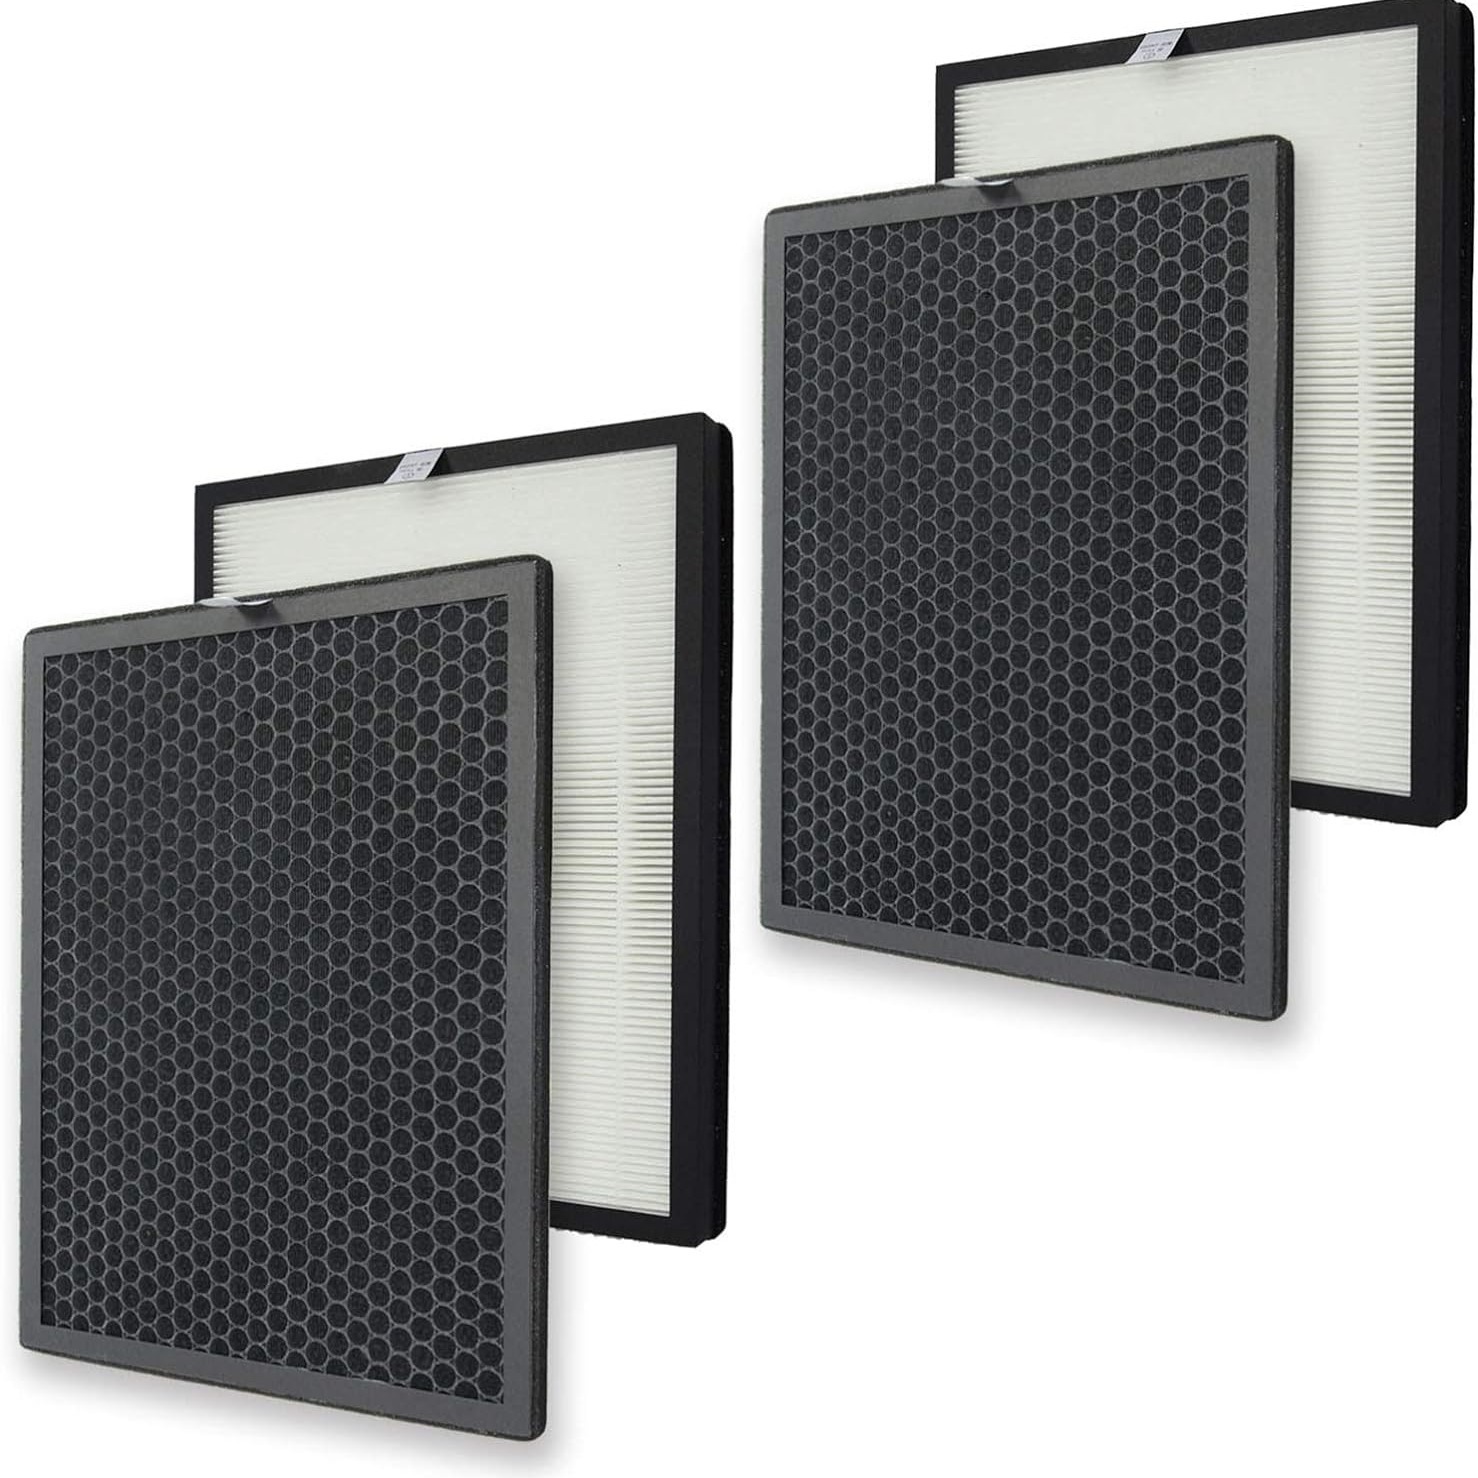 

Replacement True Hepa Filter Kit Compatible With Purifier Model 3049 Ap-b102,h13 Activated Carbon Filter Air Clean Pm2.5 Odor Smoke Vocs,2-pack